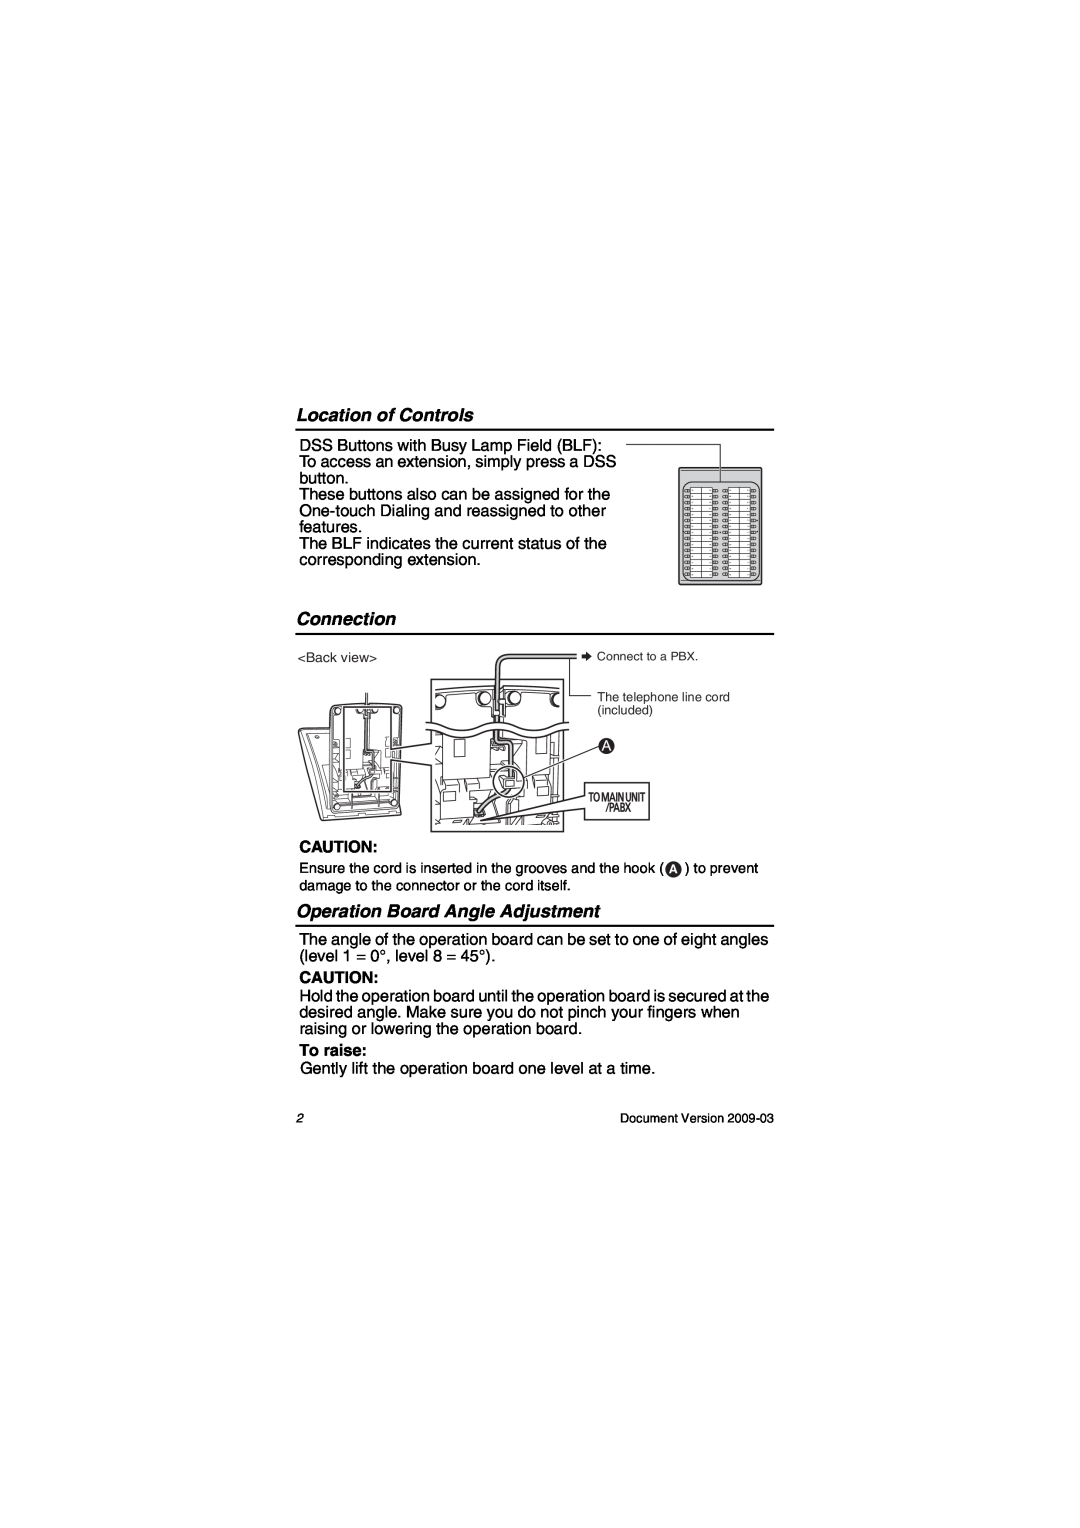 Panasonic KX-DT390 manual Location of Controls, Connection, Operation Board Angle Adjustment, To raise 